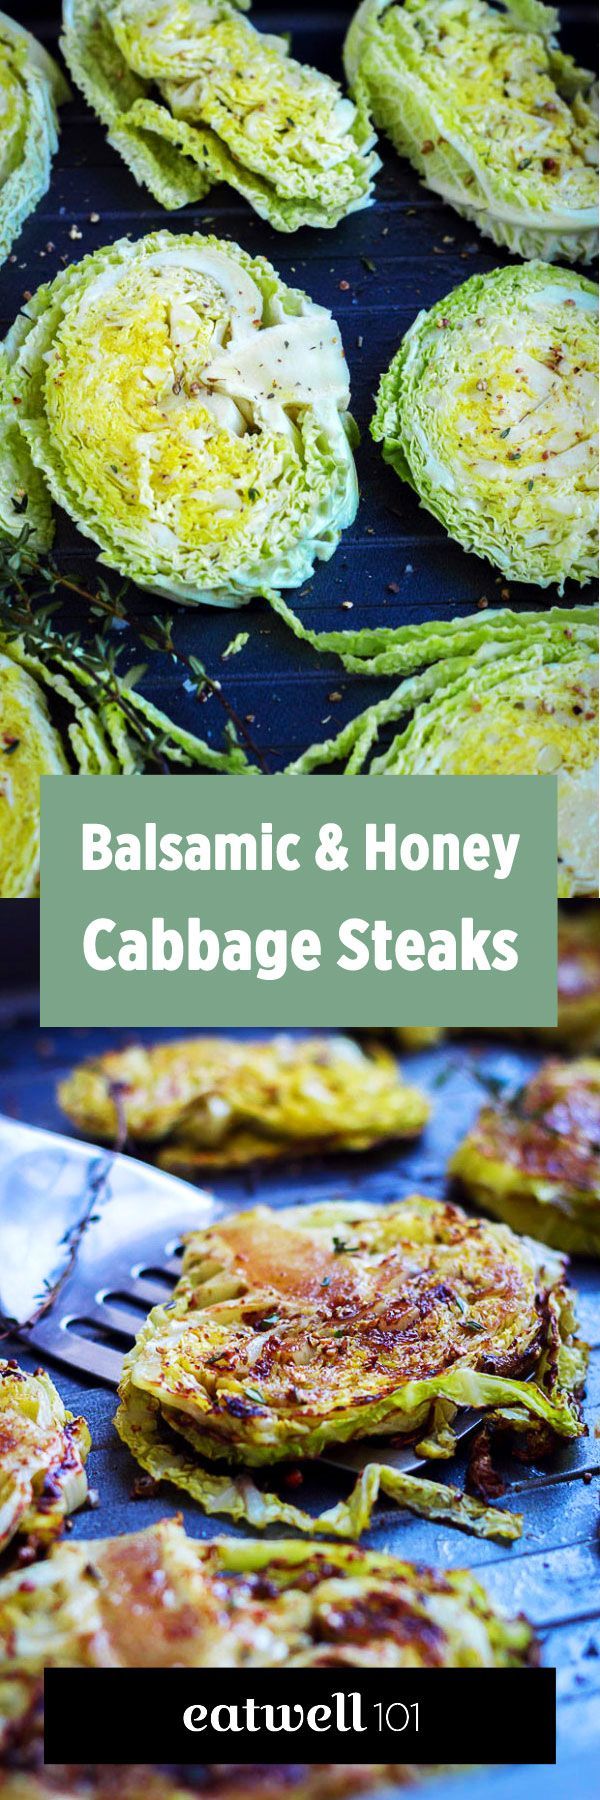 Balsamic, Honey Roasted Cabbage Steaks -   24 green cabbage recipes
 ideas